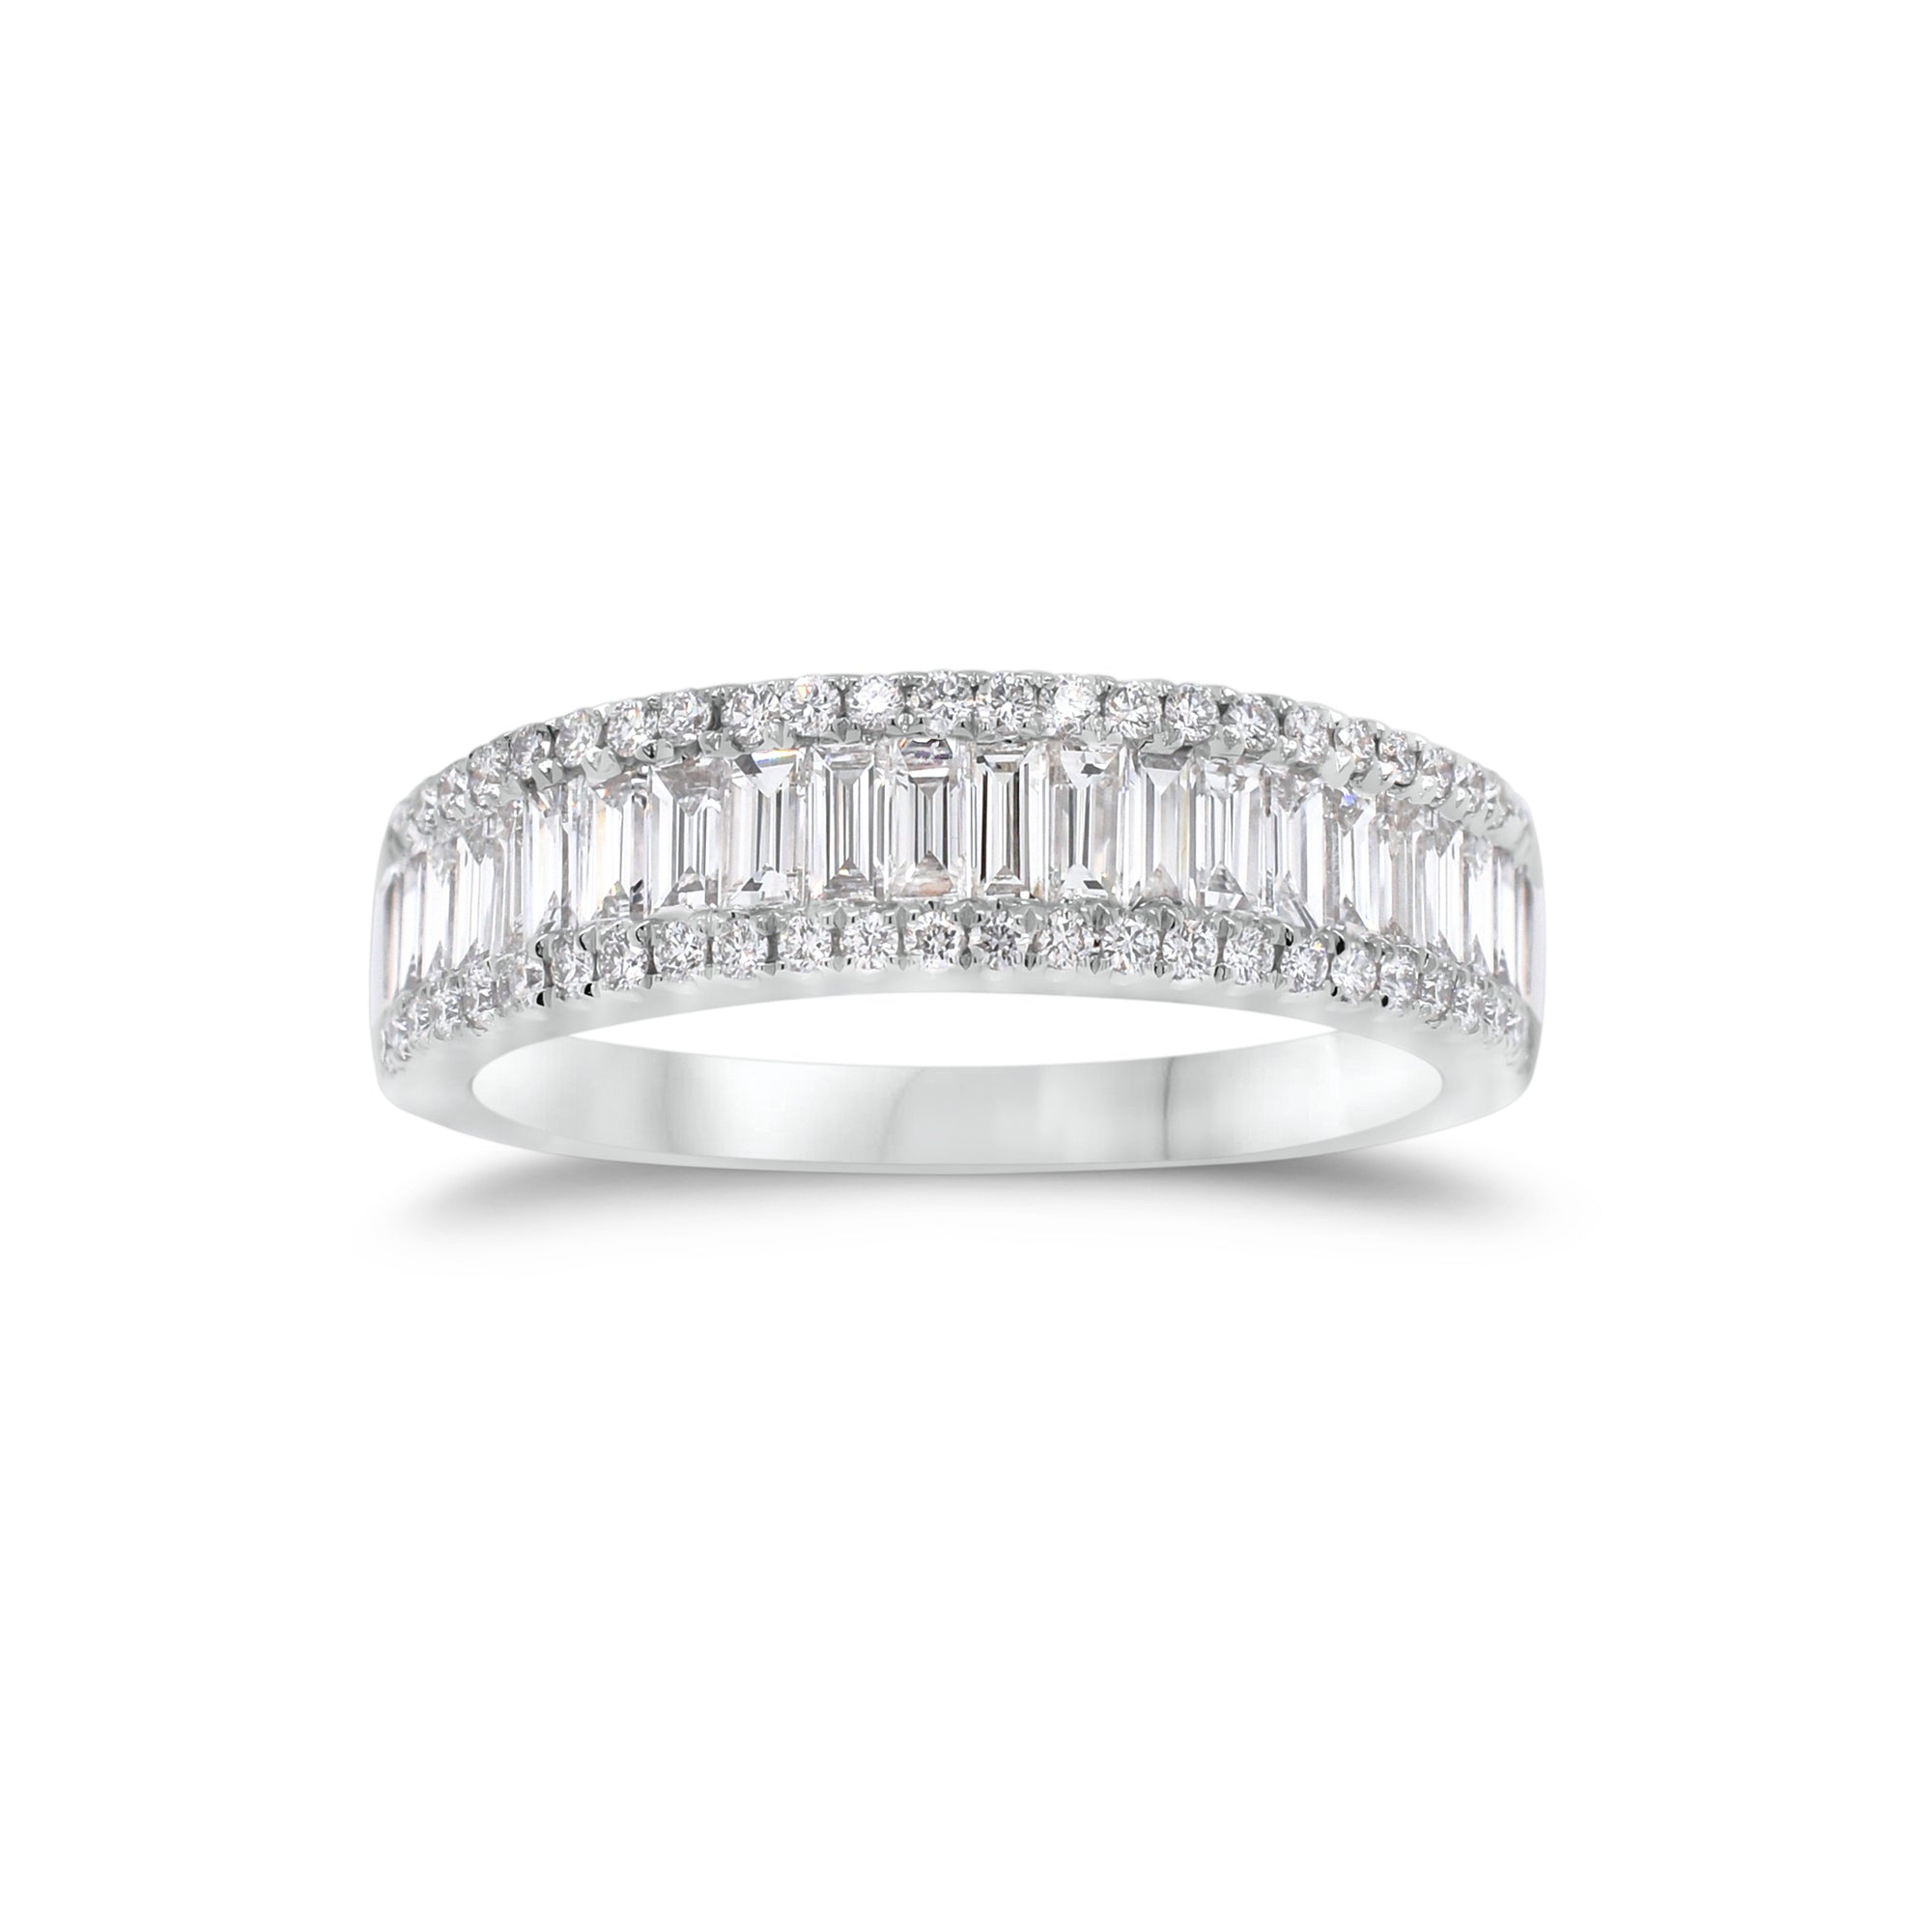 Baguette Diamond Wedding Band  - 18K gold weighing 5.41 grams  - 22 straight baguettes totaling 0.82 carats  - 54 round diamonds totaling 0.24 carats